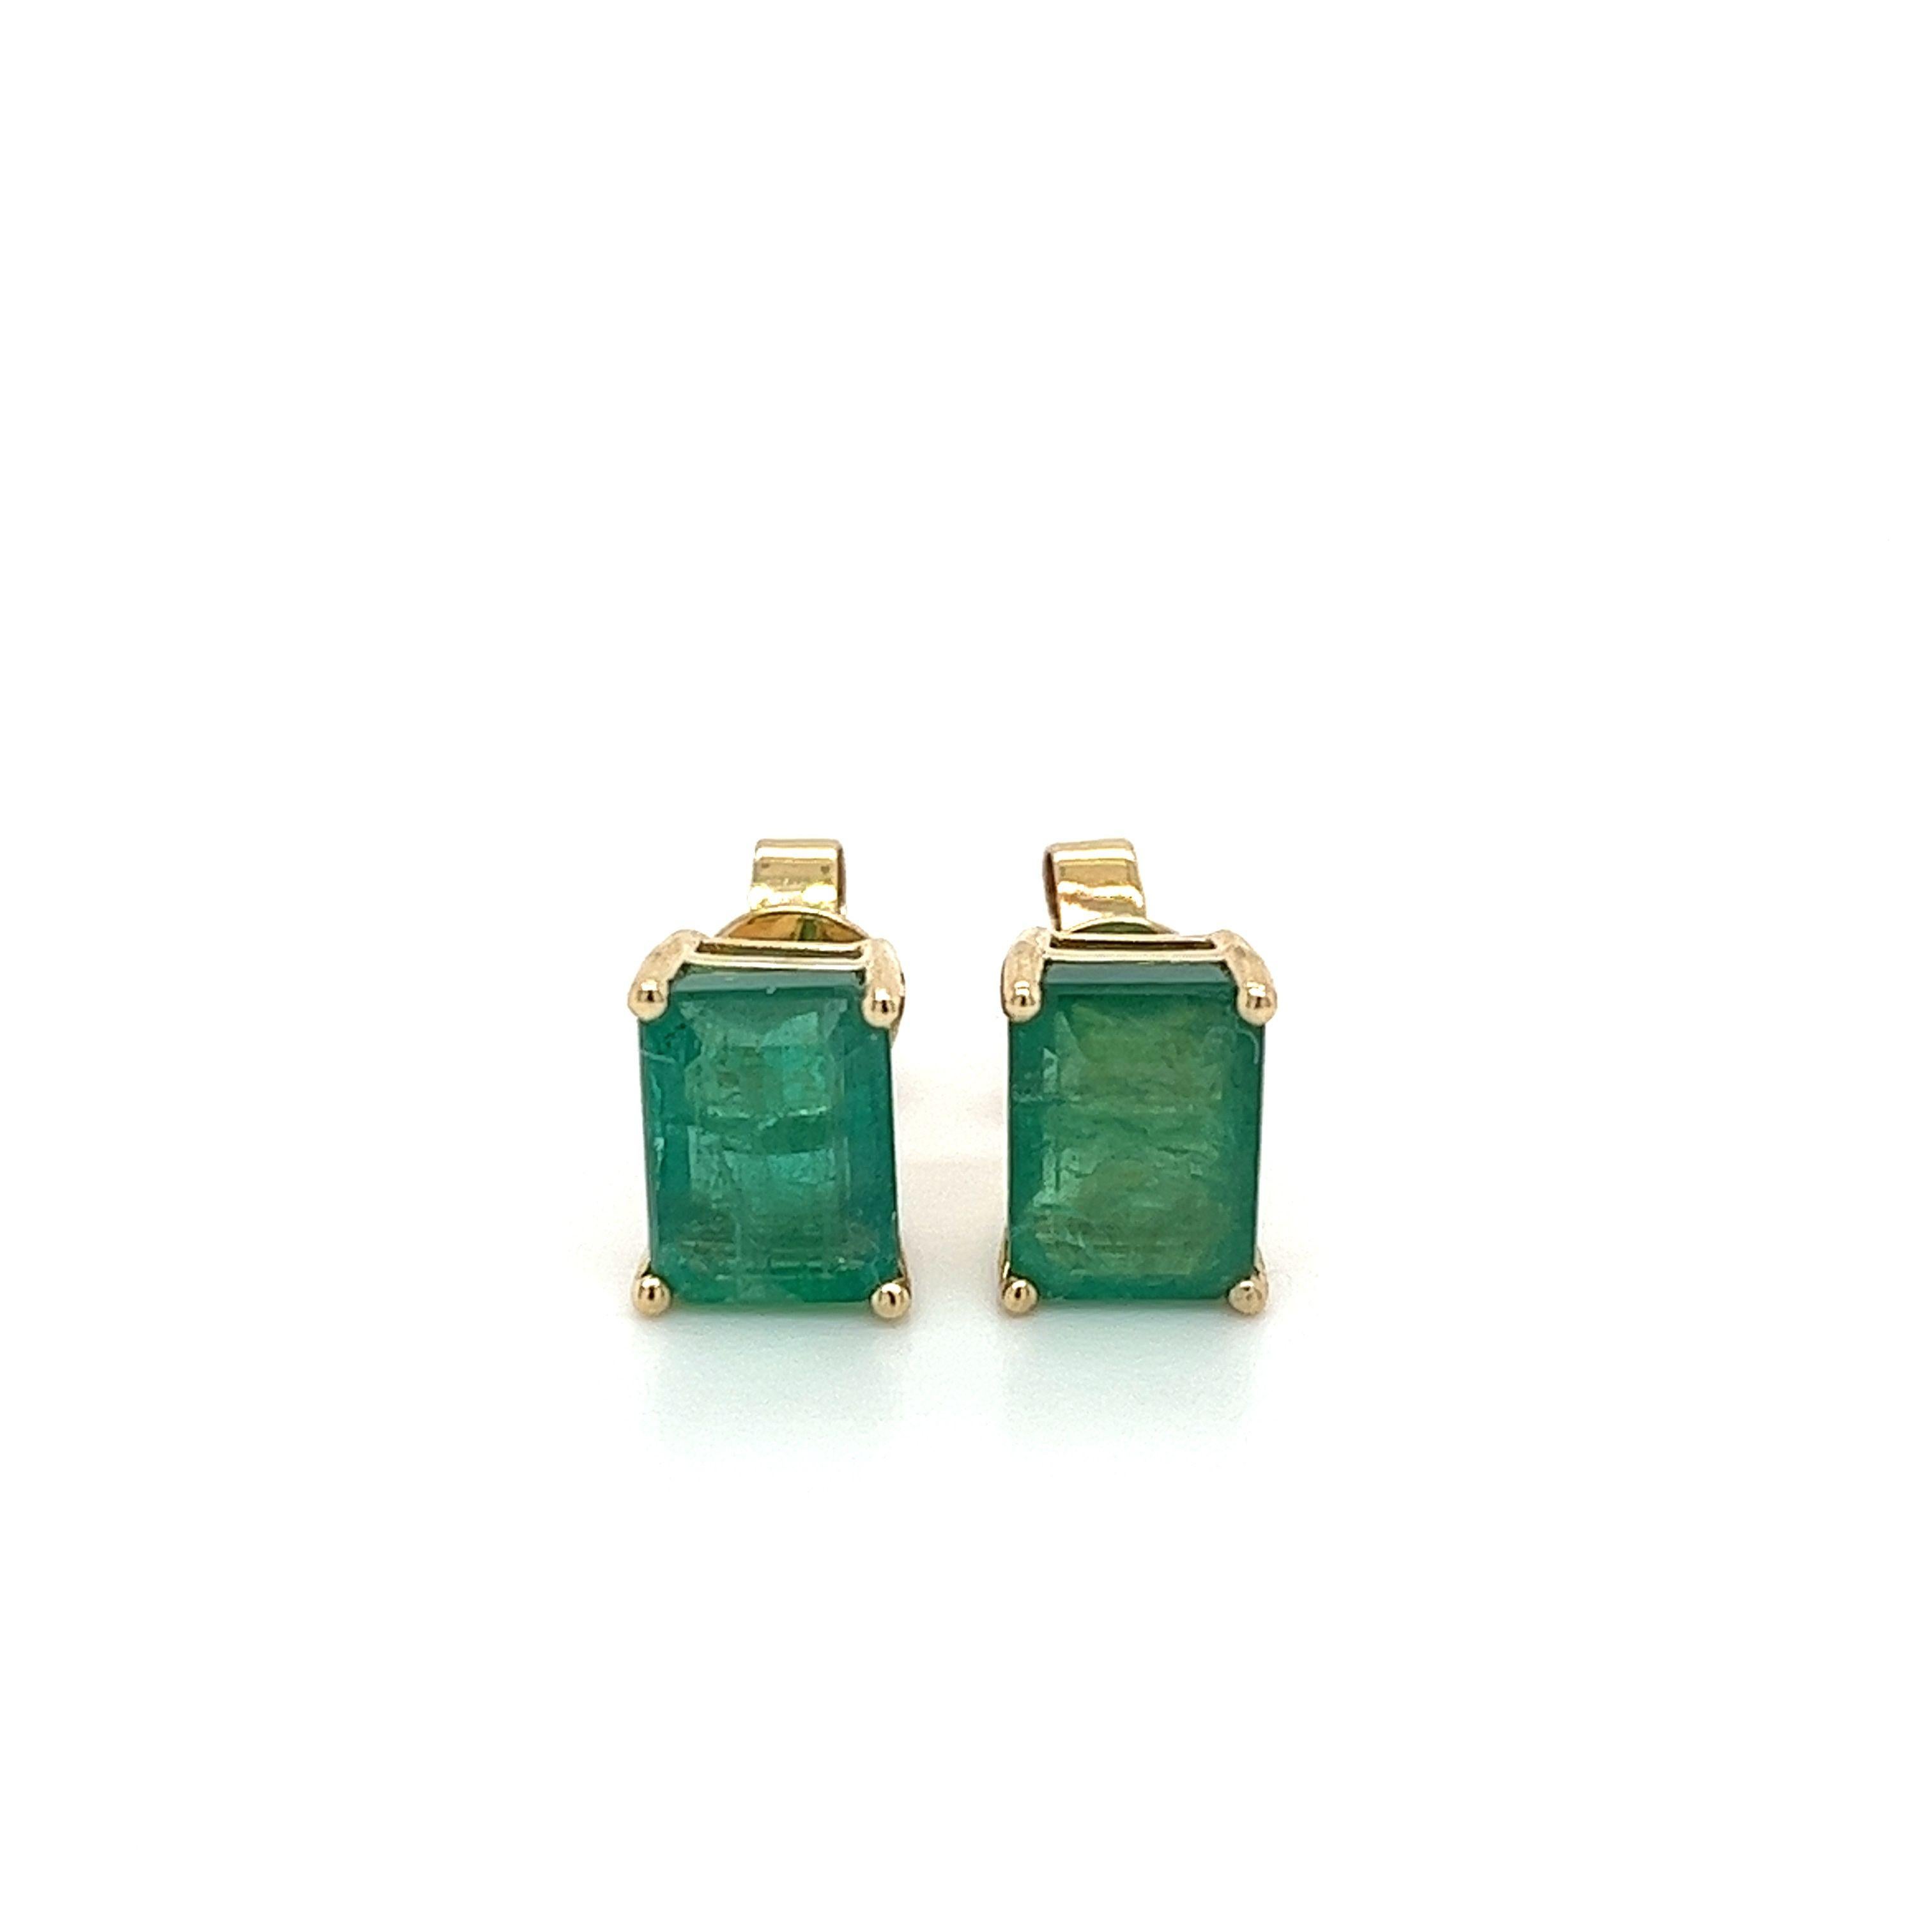 4.7 Carat Total Emerald Stud Earrings in 4-Prong 14k Solid Yellow Gold For Sale 3